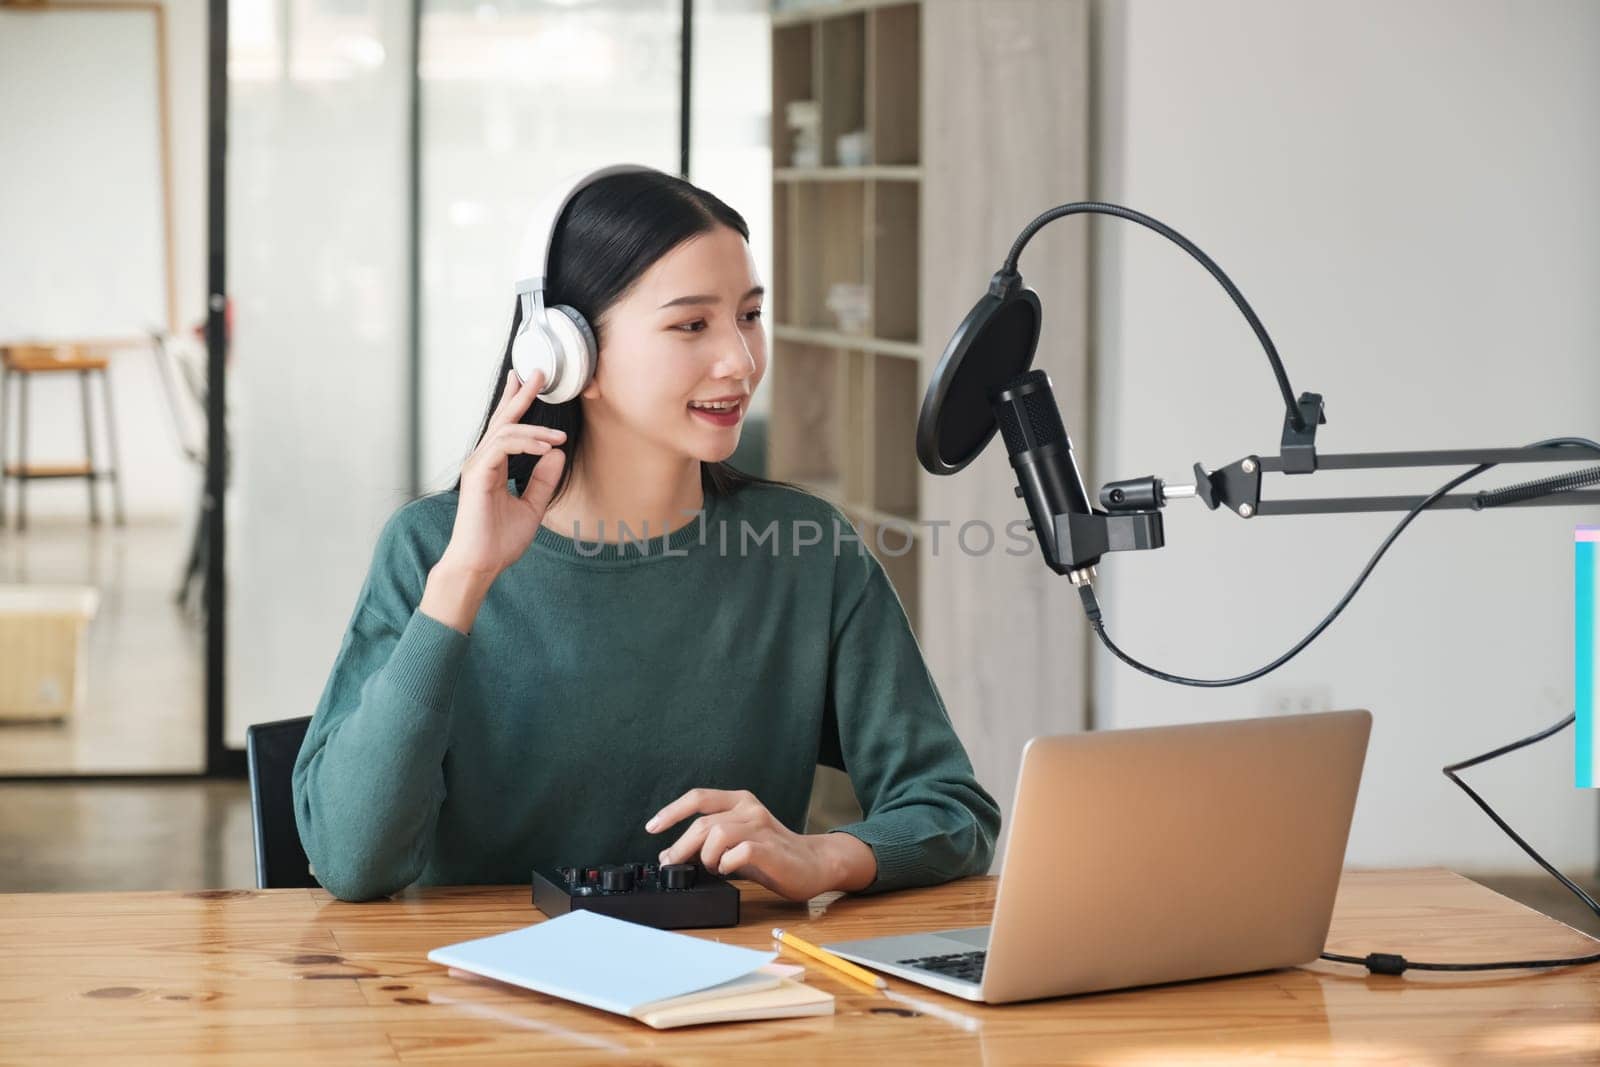 A woman is sitting at a desk with a laptop and a microphone by ijeab